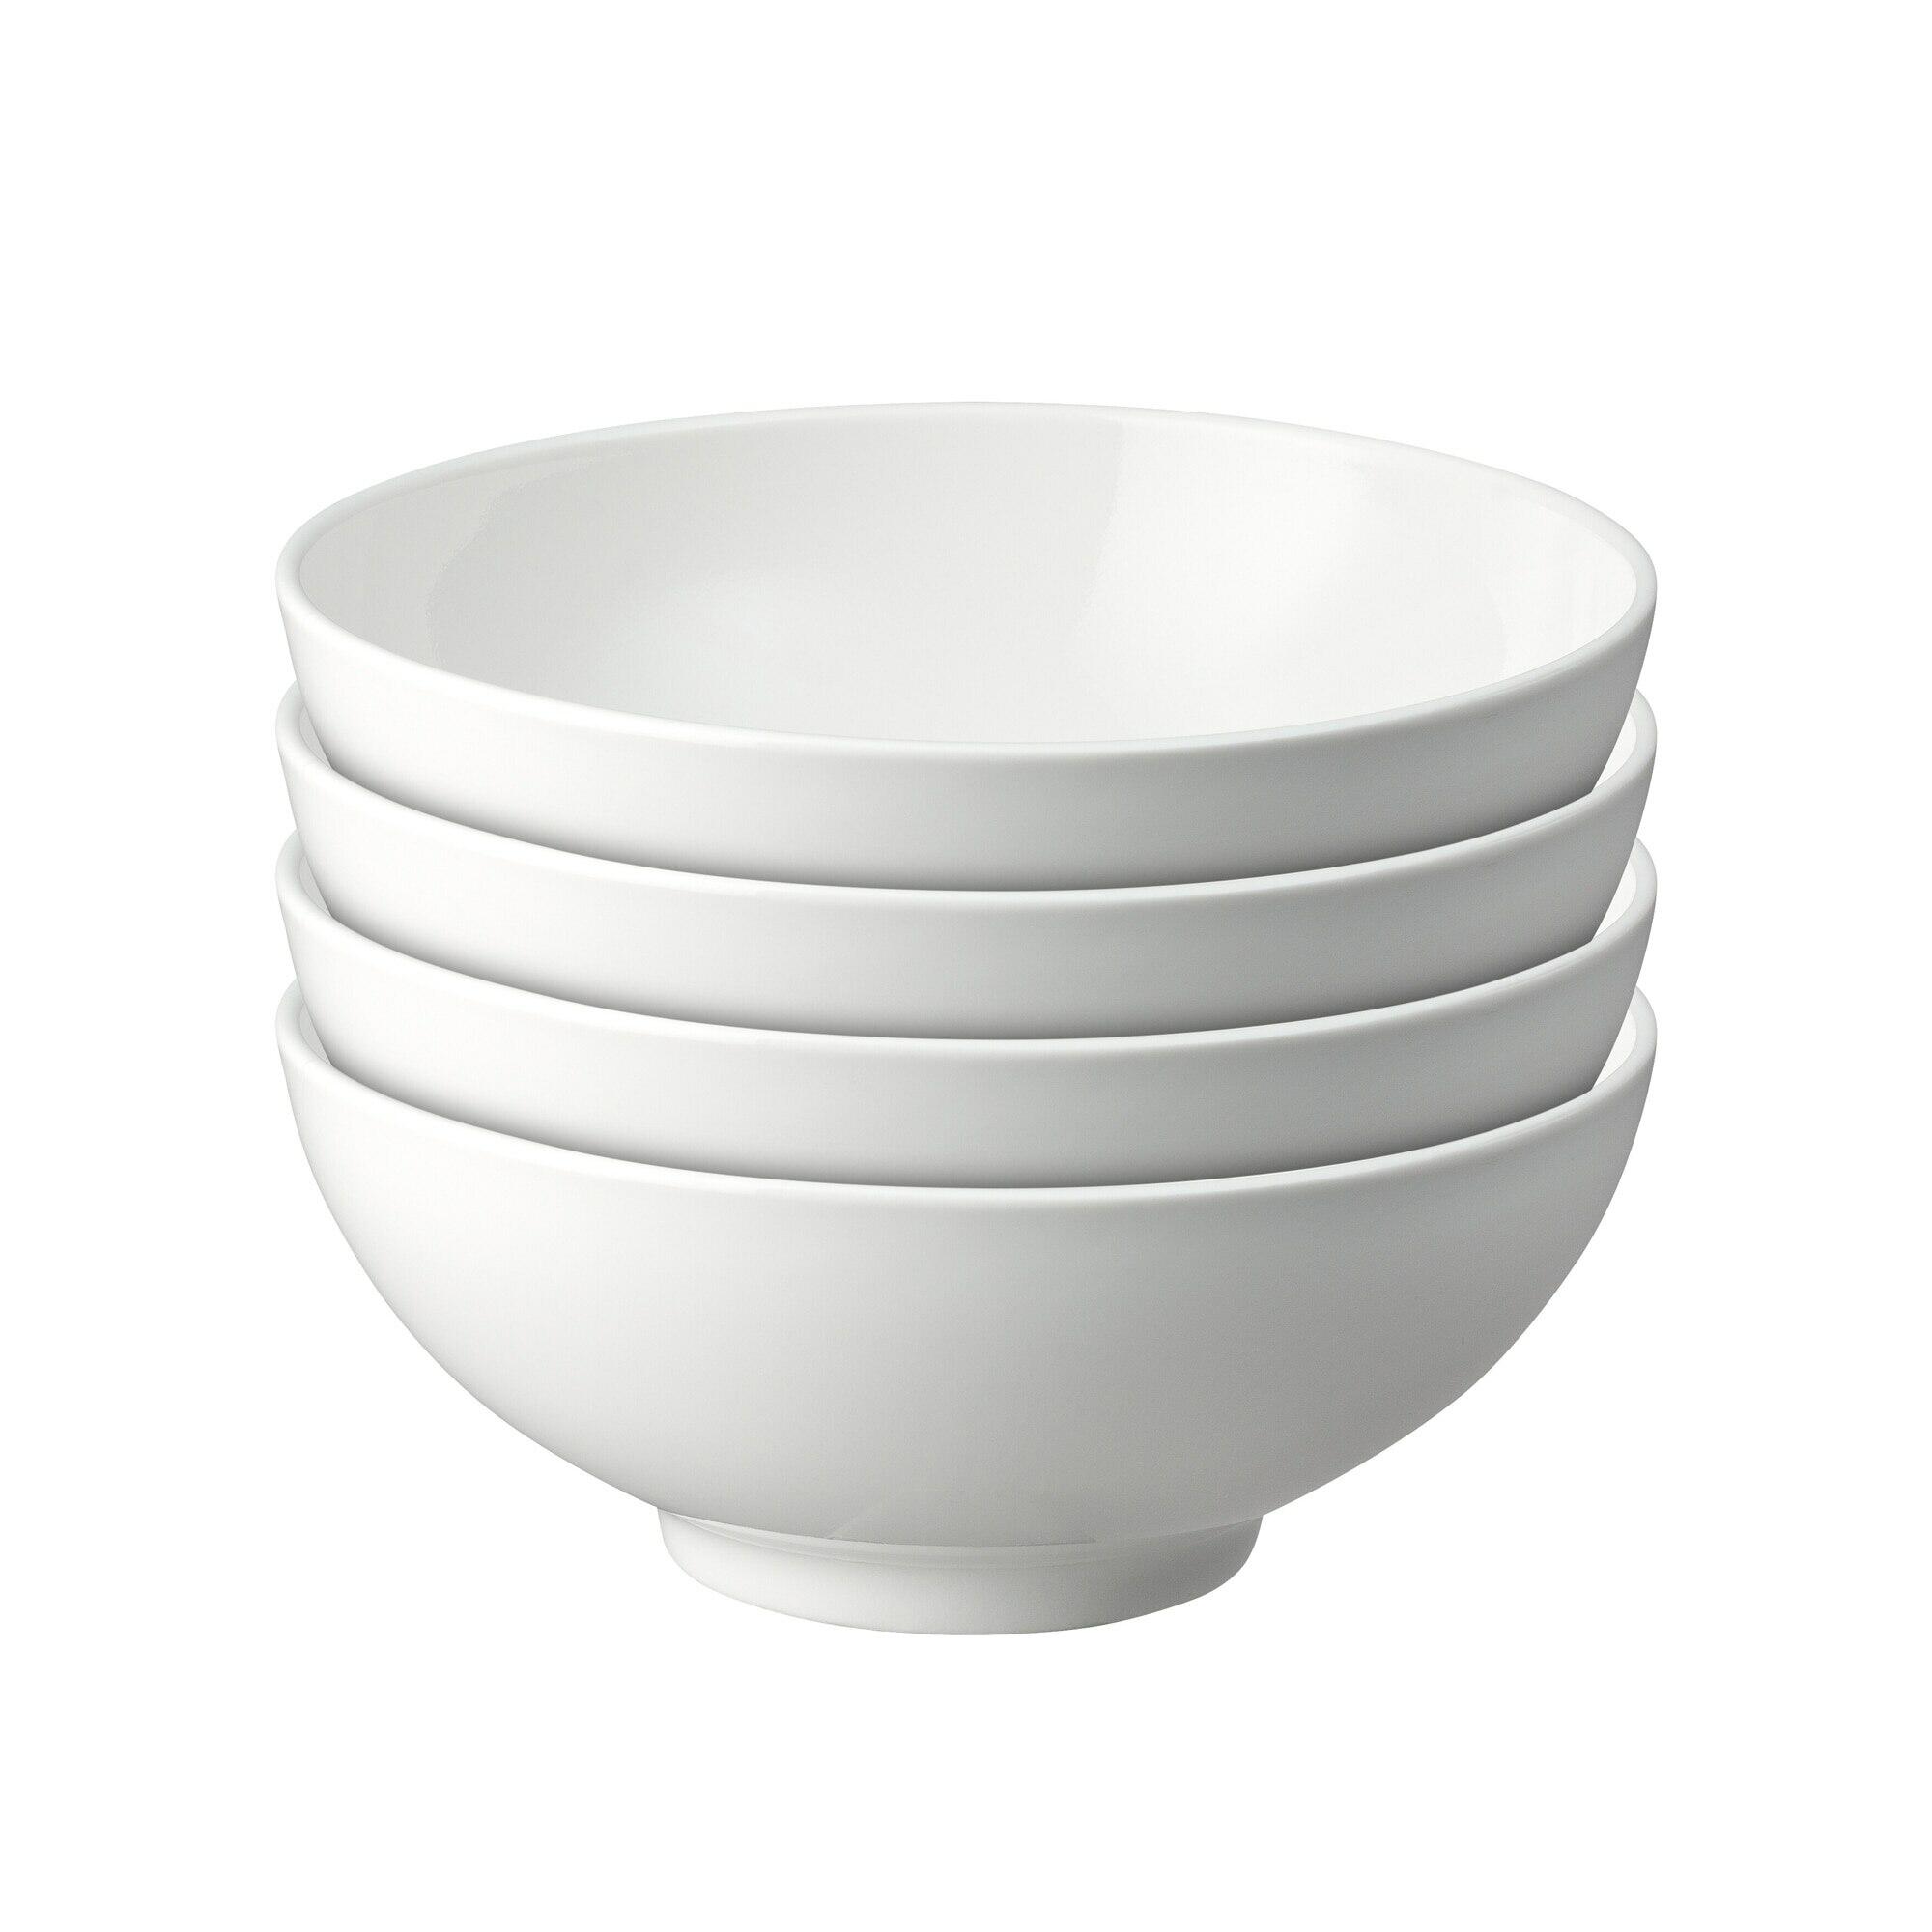 Porcelain Classic White Set Of 4 Cereal Bowl